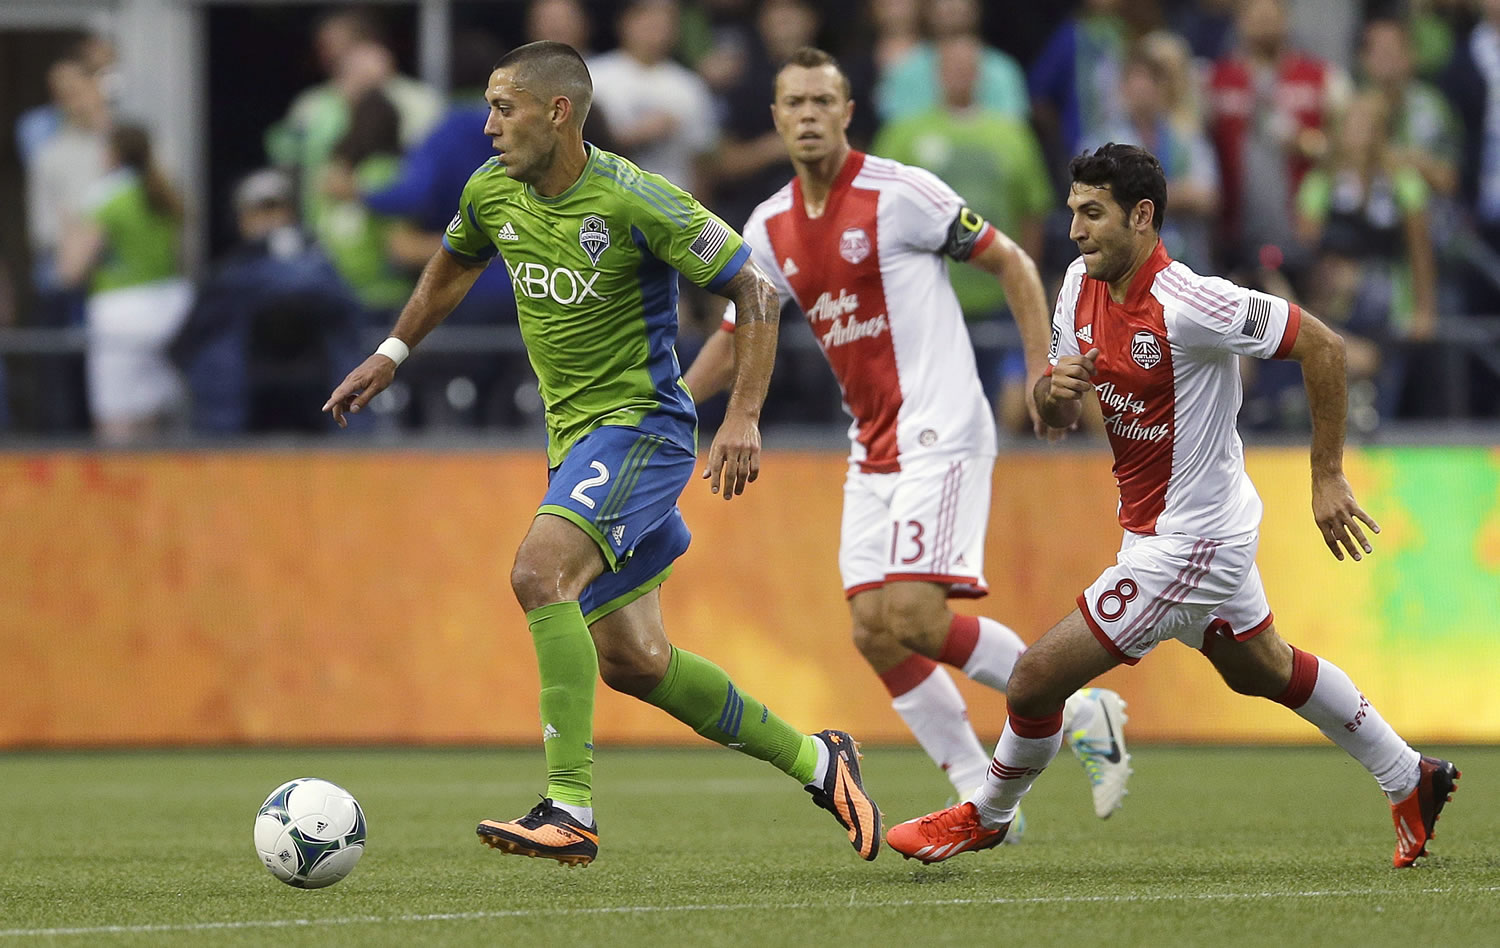 Seattle Sounders' Clint Dempsey dribbles the ball as Portland Timbers' Jack Jewsbury (13) and Diego Valeri (8) defend in the first half Sunday in Seattle.